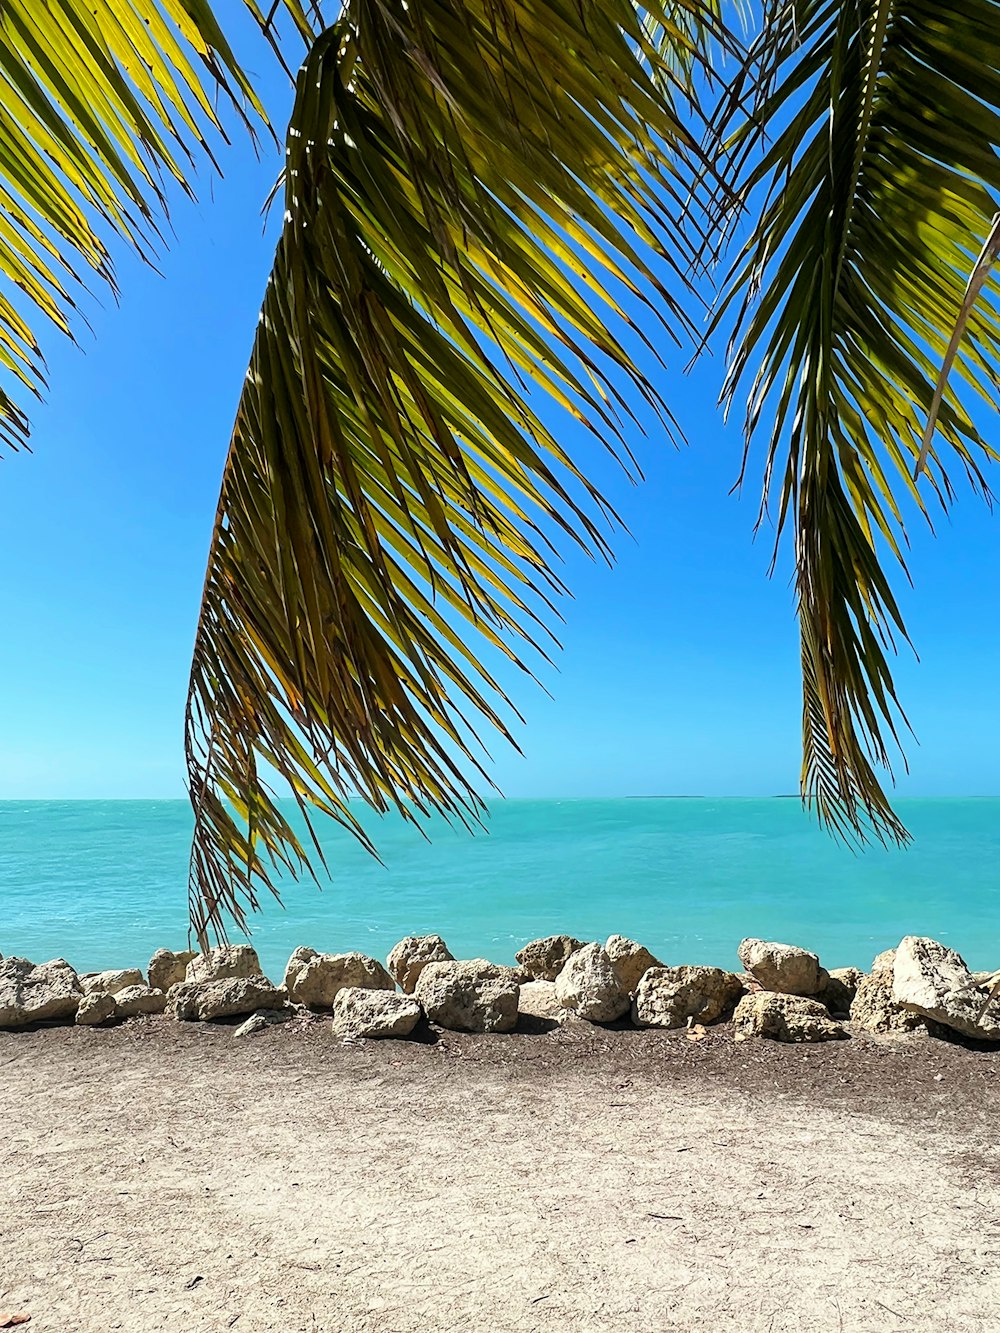 a view of the ocean from under a palm tree